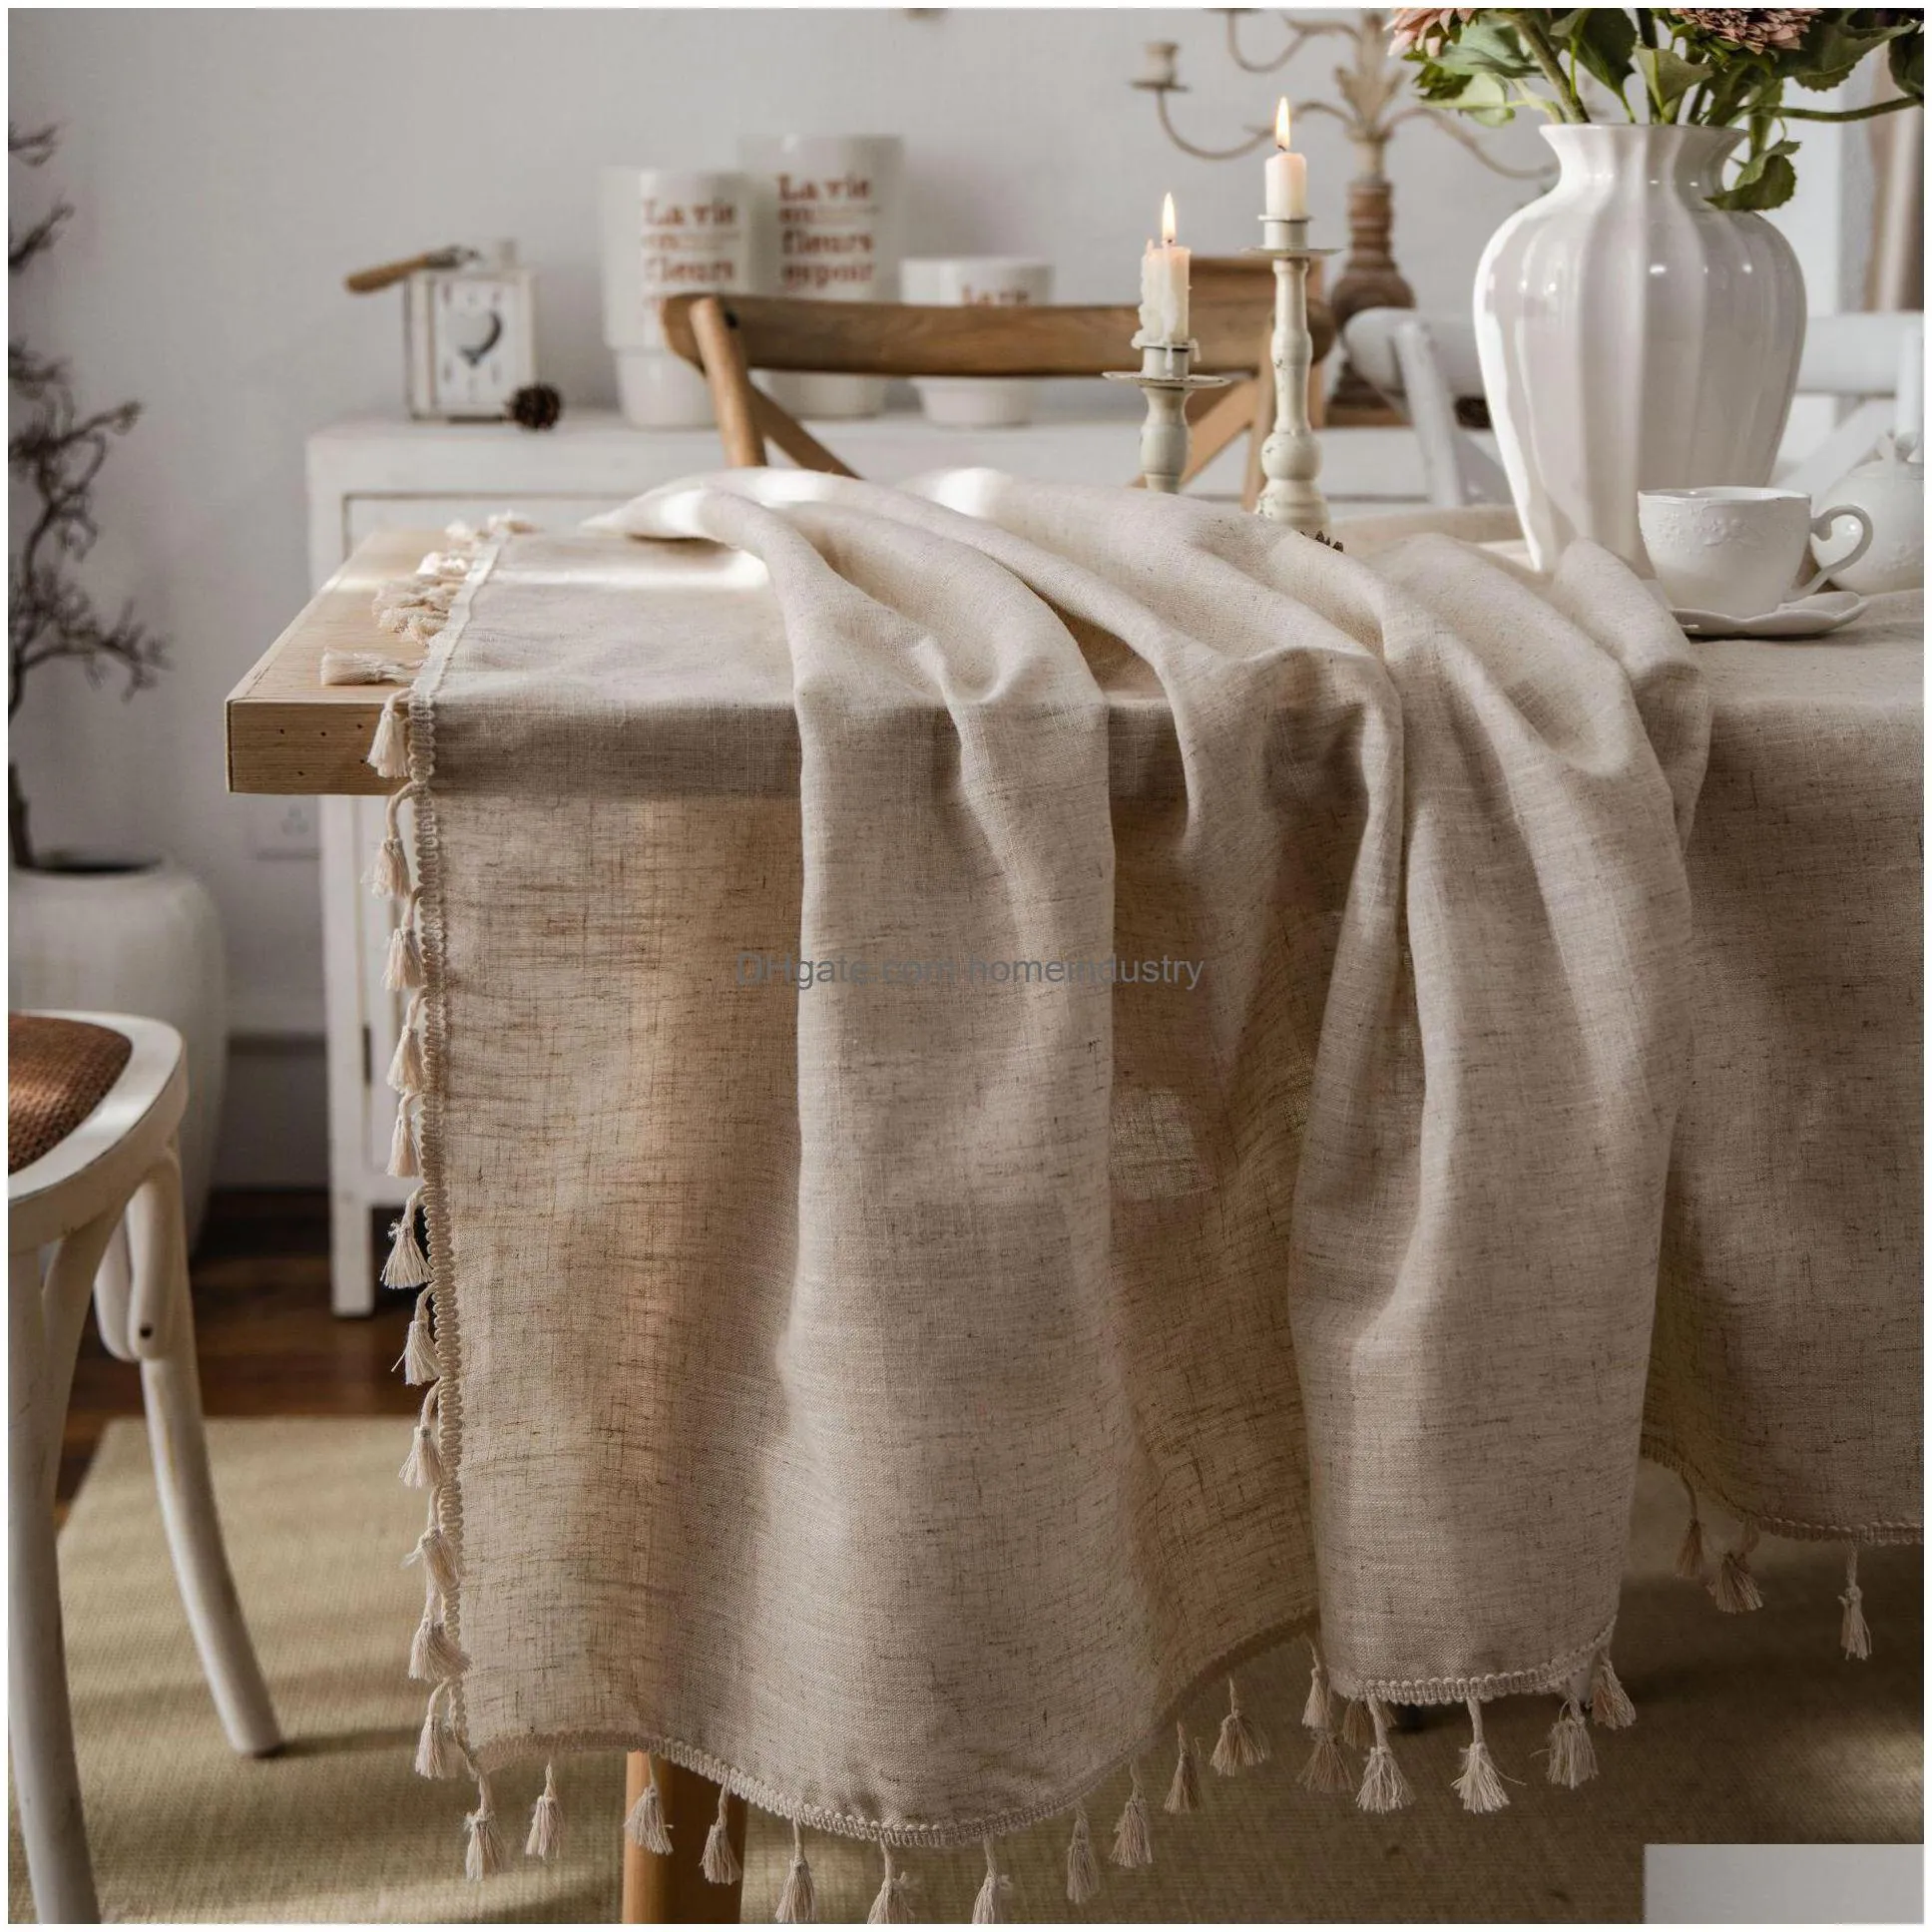 Table Cloth Tassel Cotton And Linen Tapete Rectangar Tablecloth For Nappe De Tables Er Drop Delivery Home Garden Textiles Cloths Dheiw